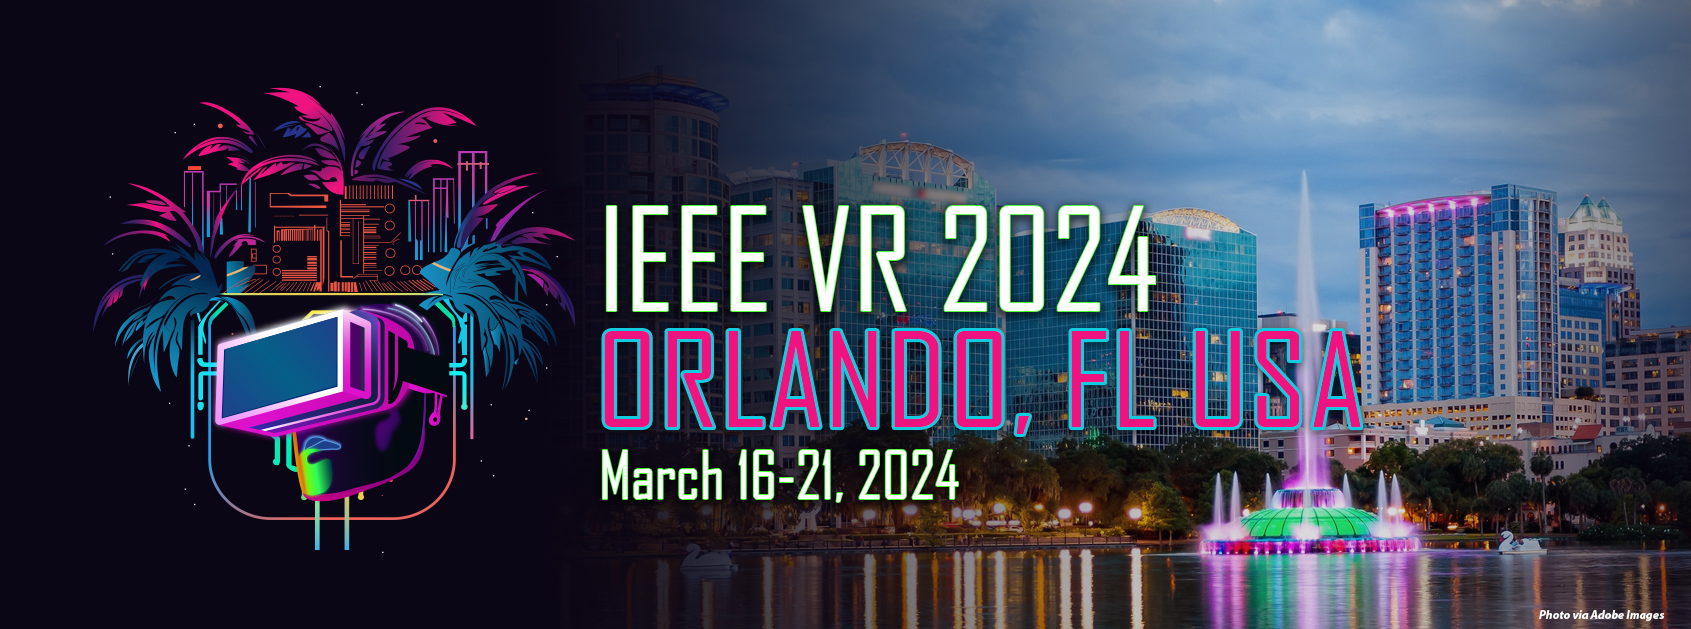 The IEEE VR 2024 Logo | Banner